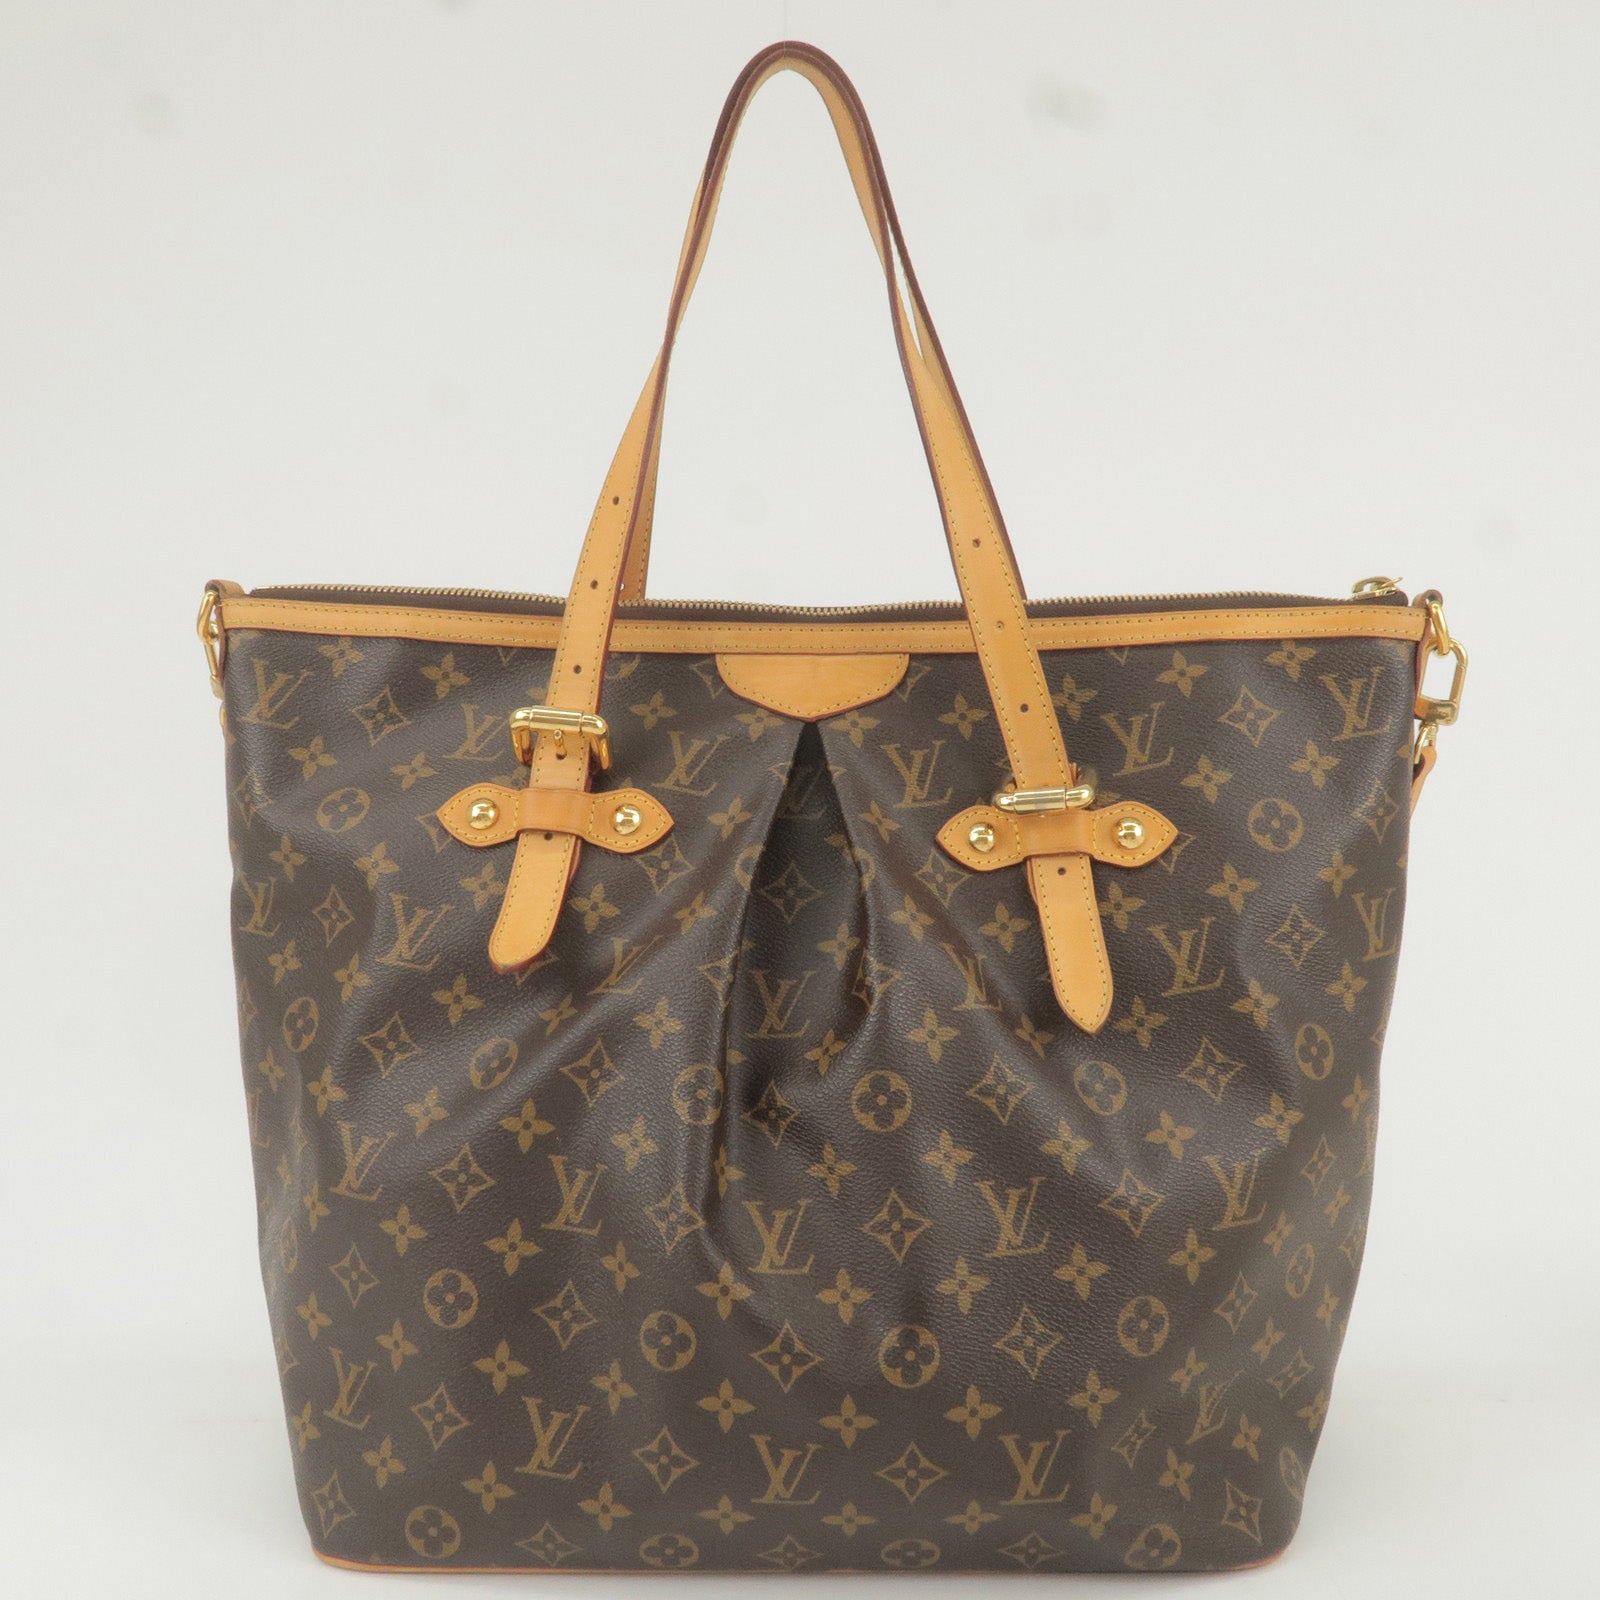 LOUIS VUITTON TROUVILLE PM//REVIEW// WHAT WILL FIT INSIDE